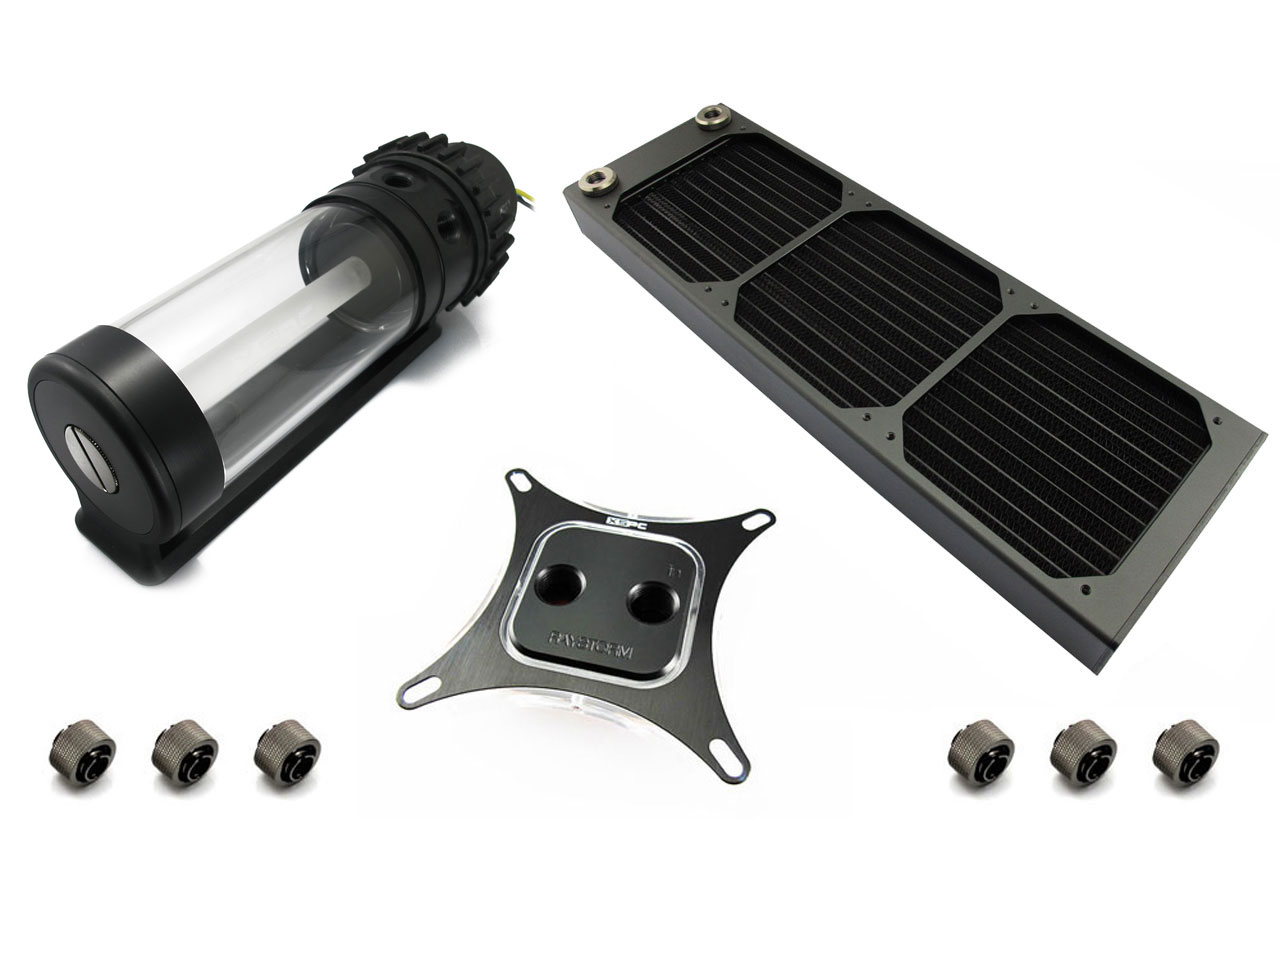 XSPC RayStorm D5 Photon AX360 WaterCooling Kit – This Just May be a Work of Art!